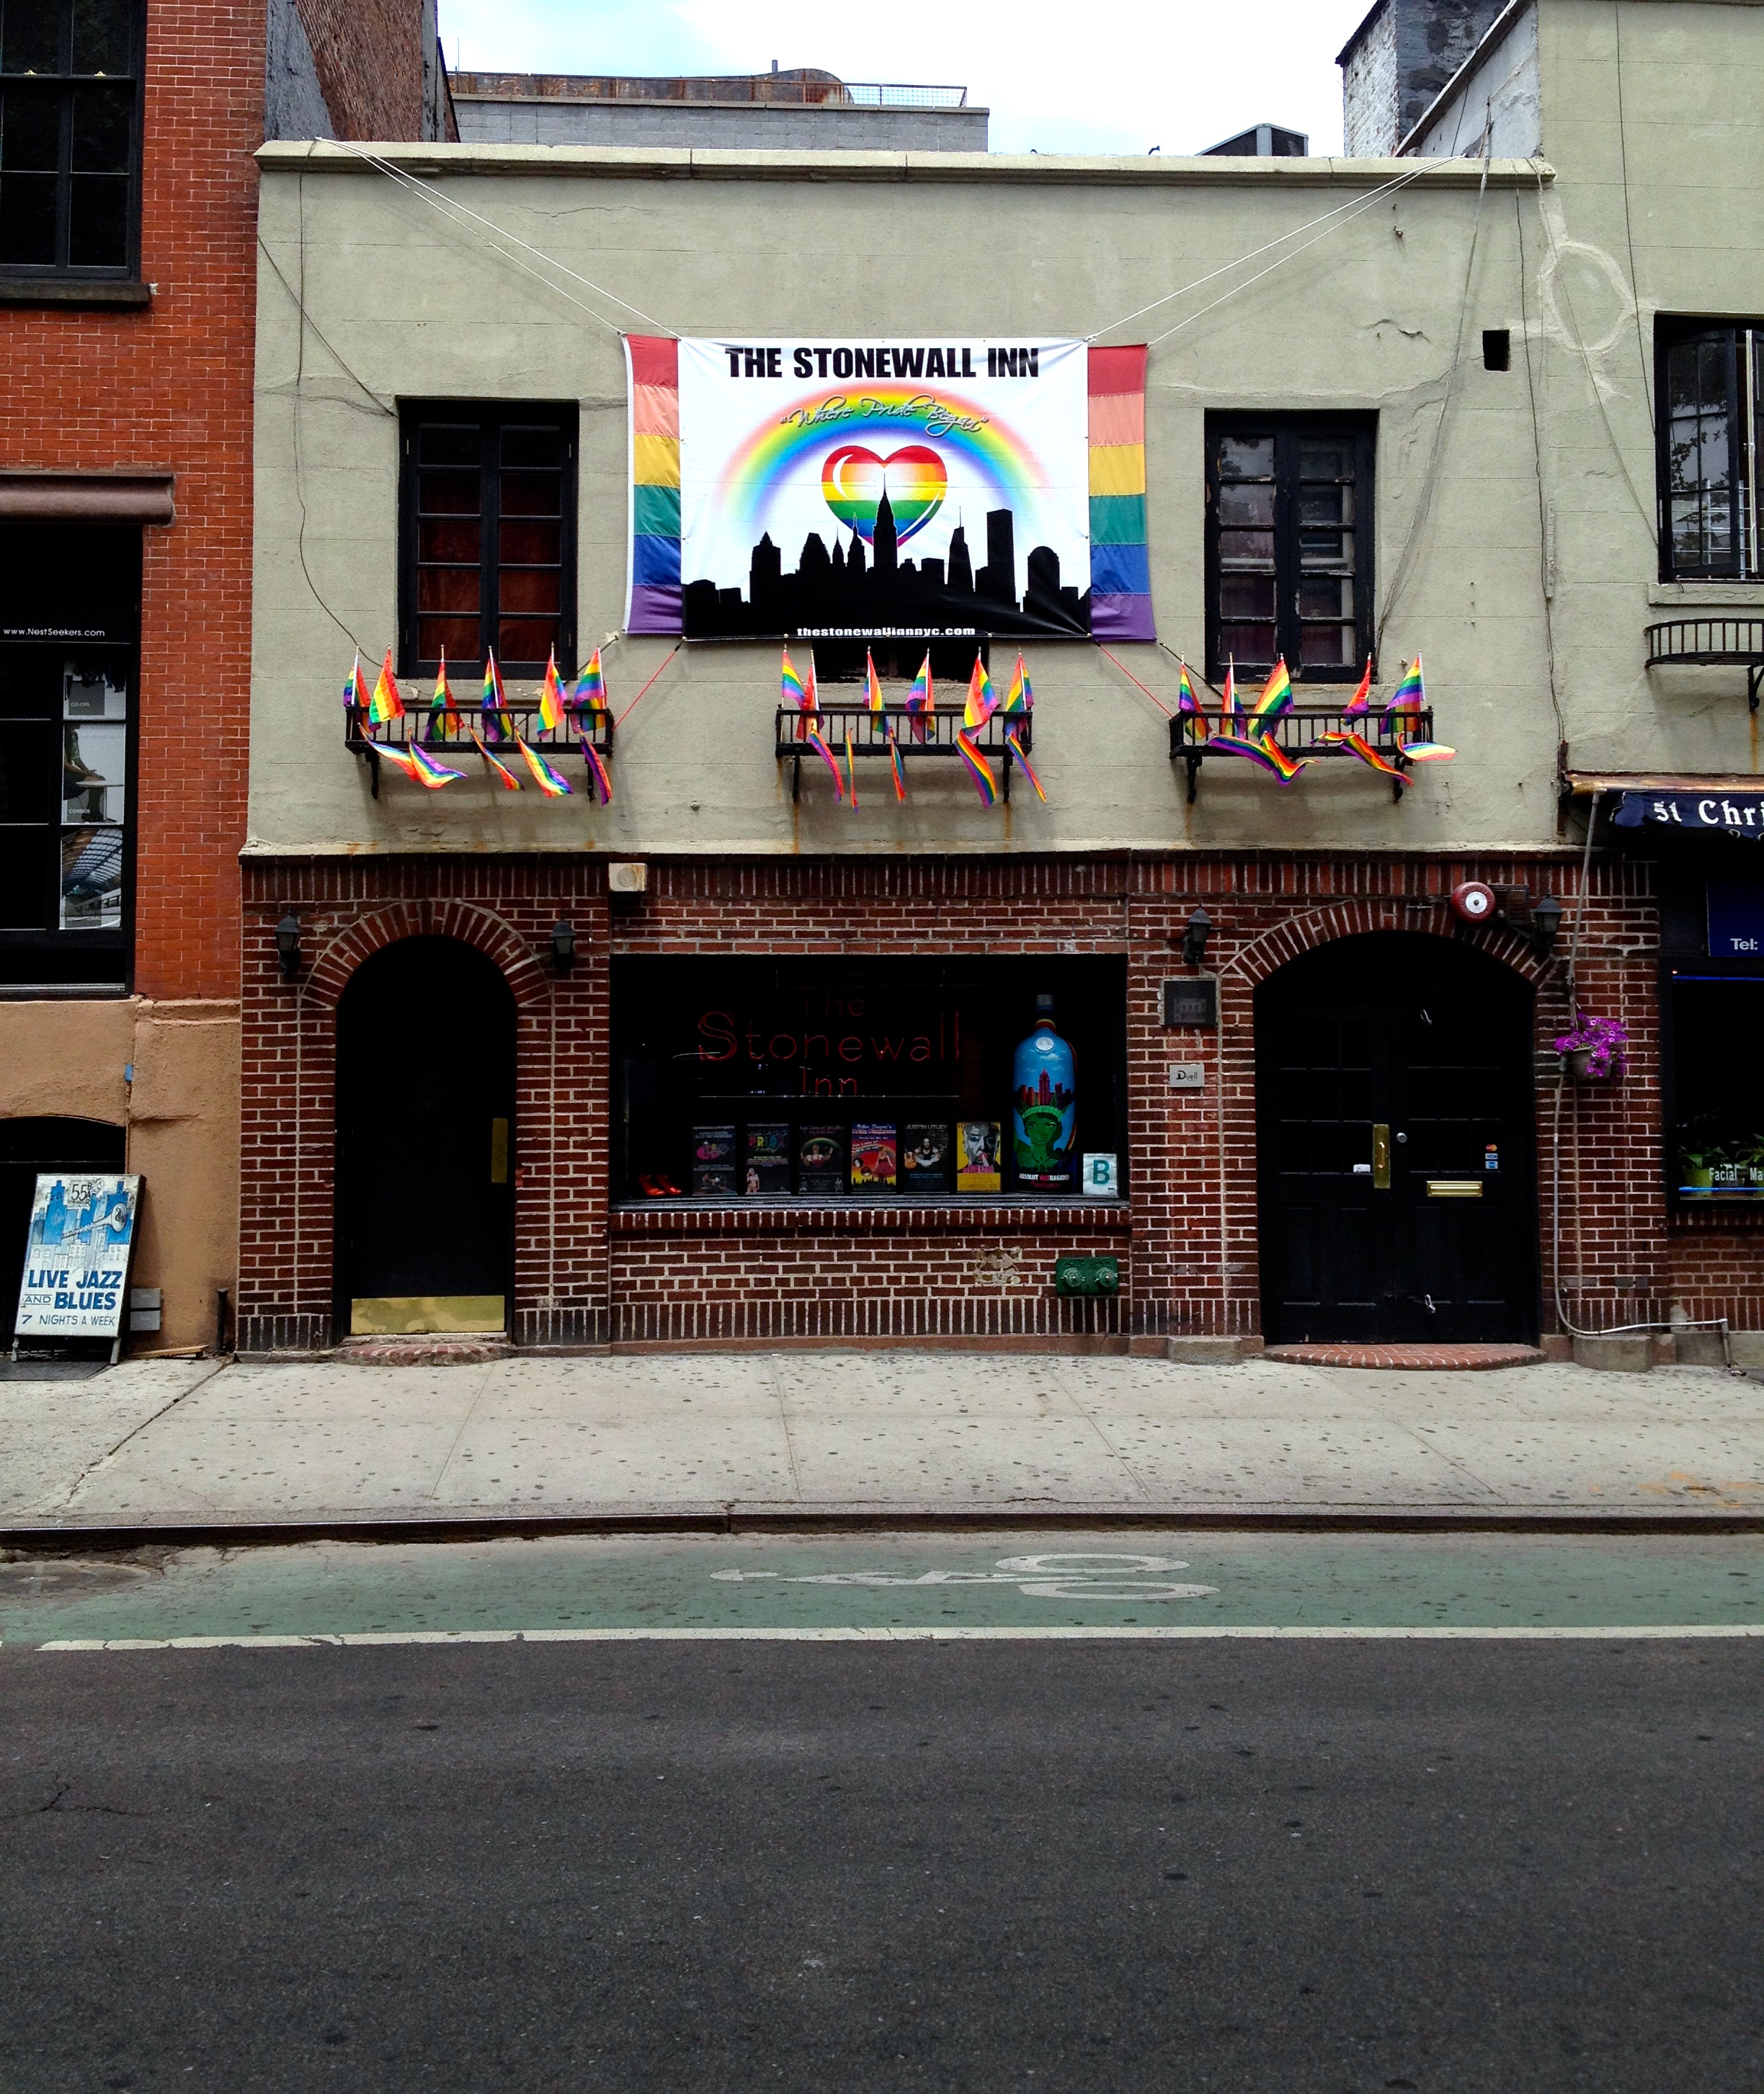 The front of The Stonewall Inn in New York